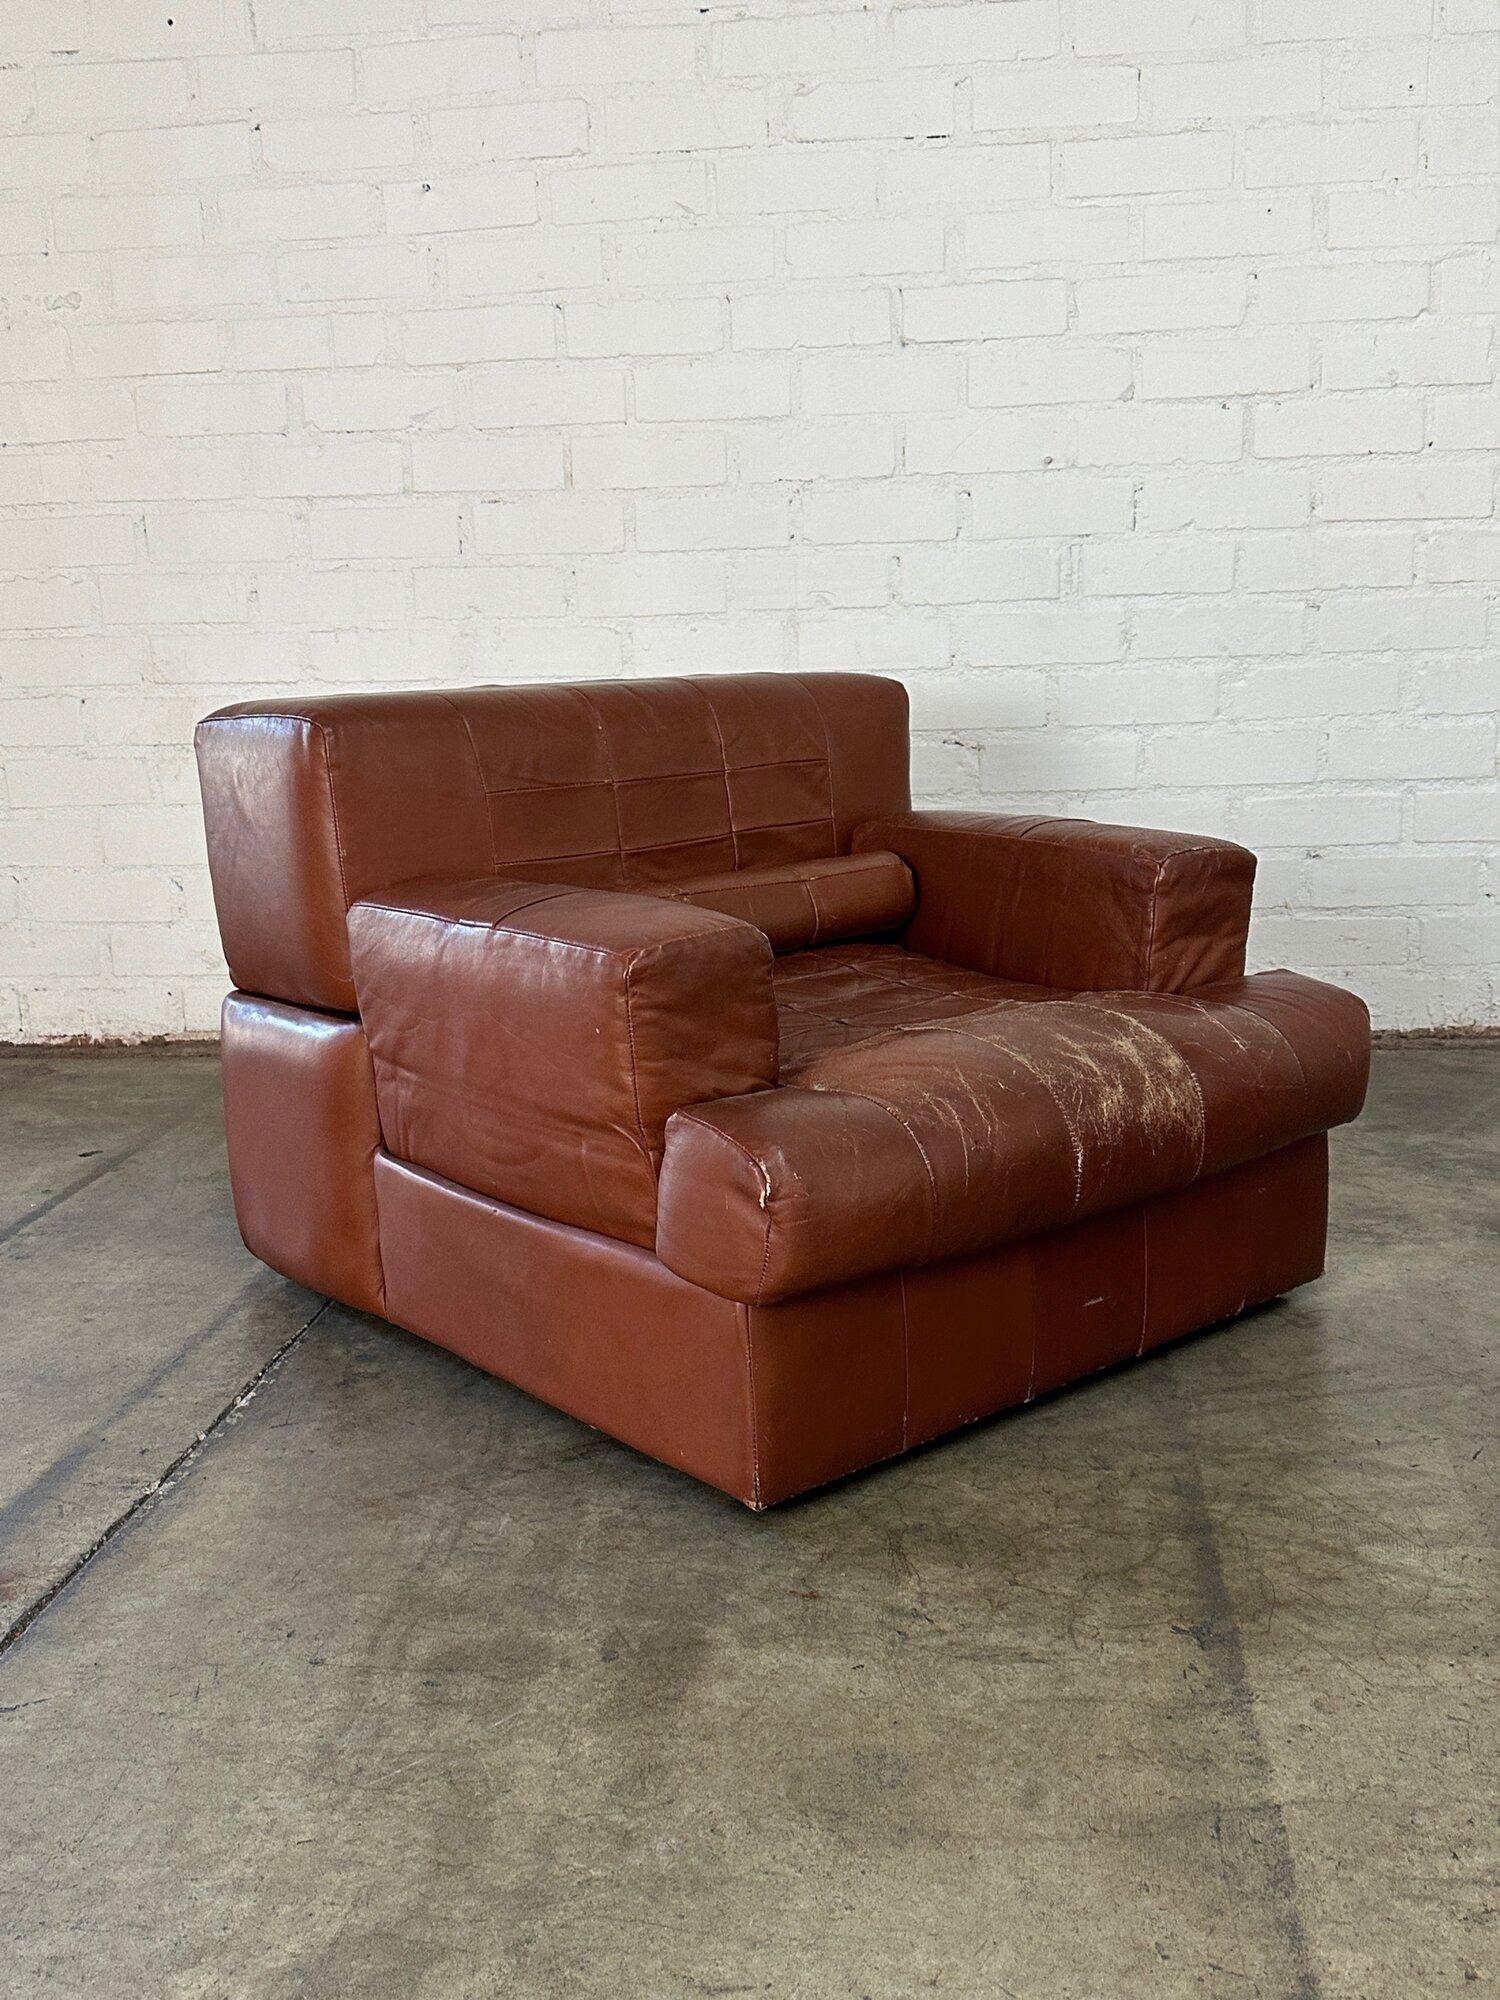 W34 D37 H26 SW20 SD25 SH14 AH19

Vintage Percival Lafer lounge chairs and ottoman in patchwork leather. Lounge chair is structurally sound and would benefit from new leather. Leather is usable as is but is heavily patinated with heavy creasing in